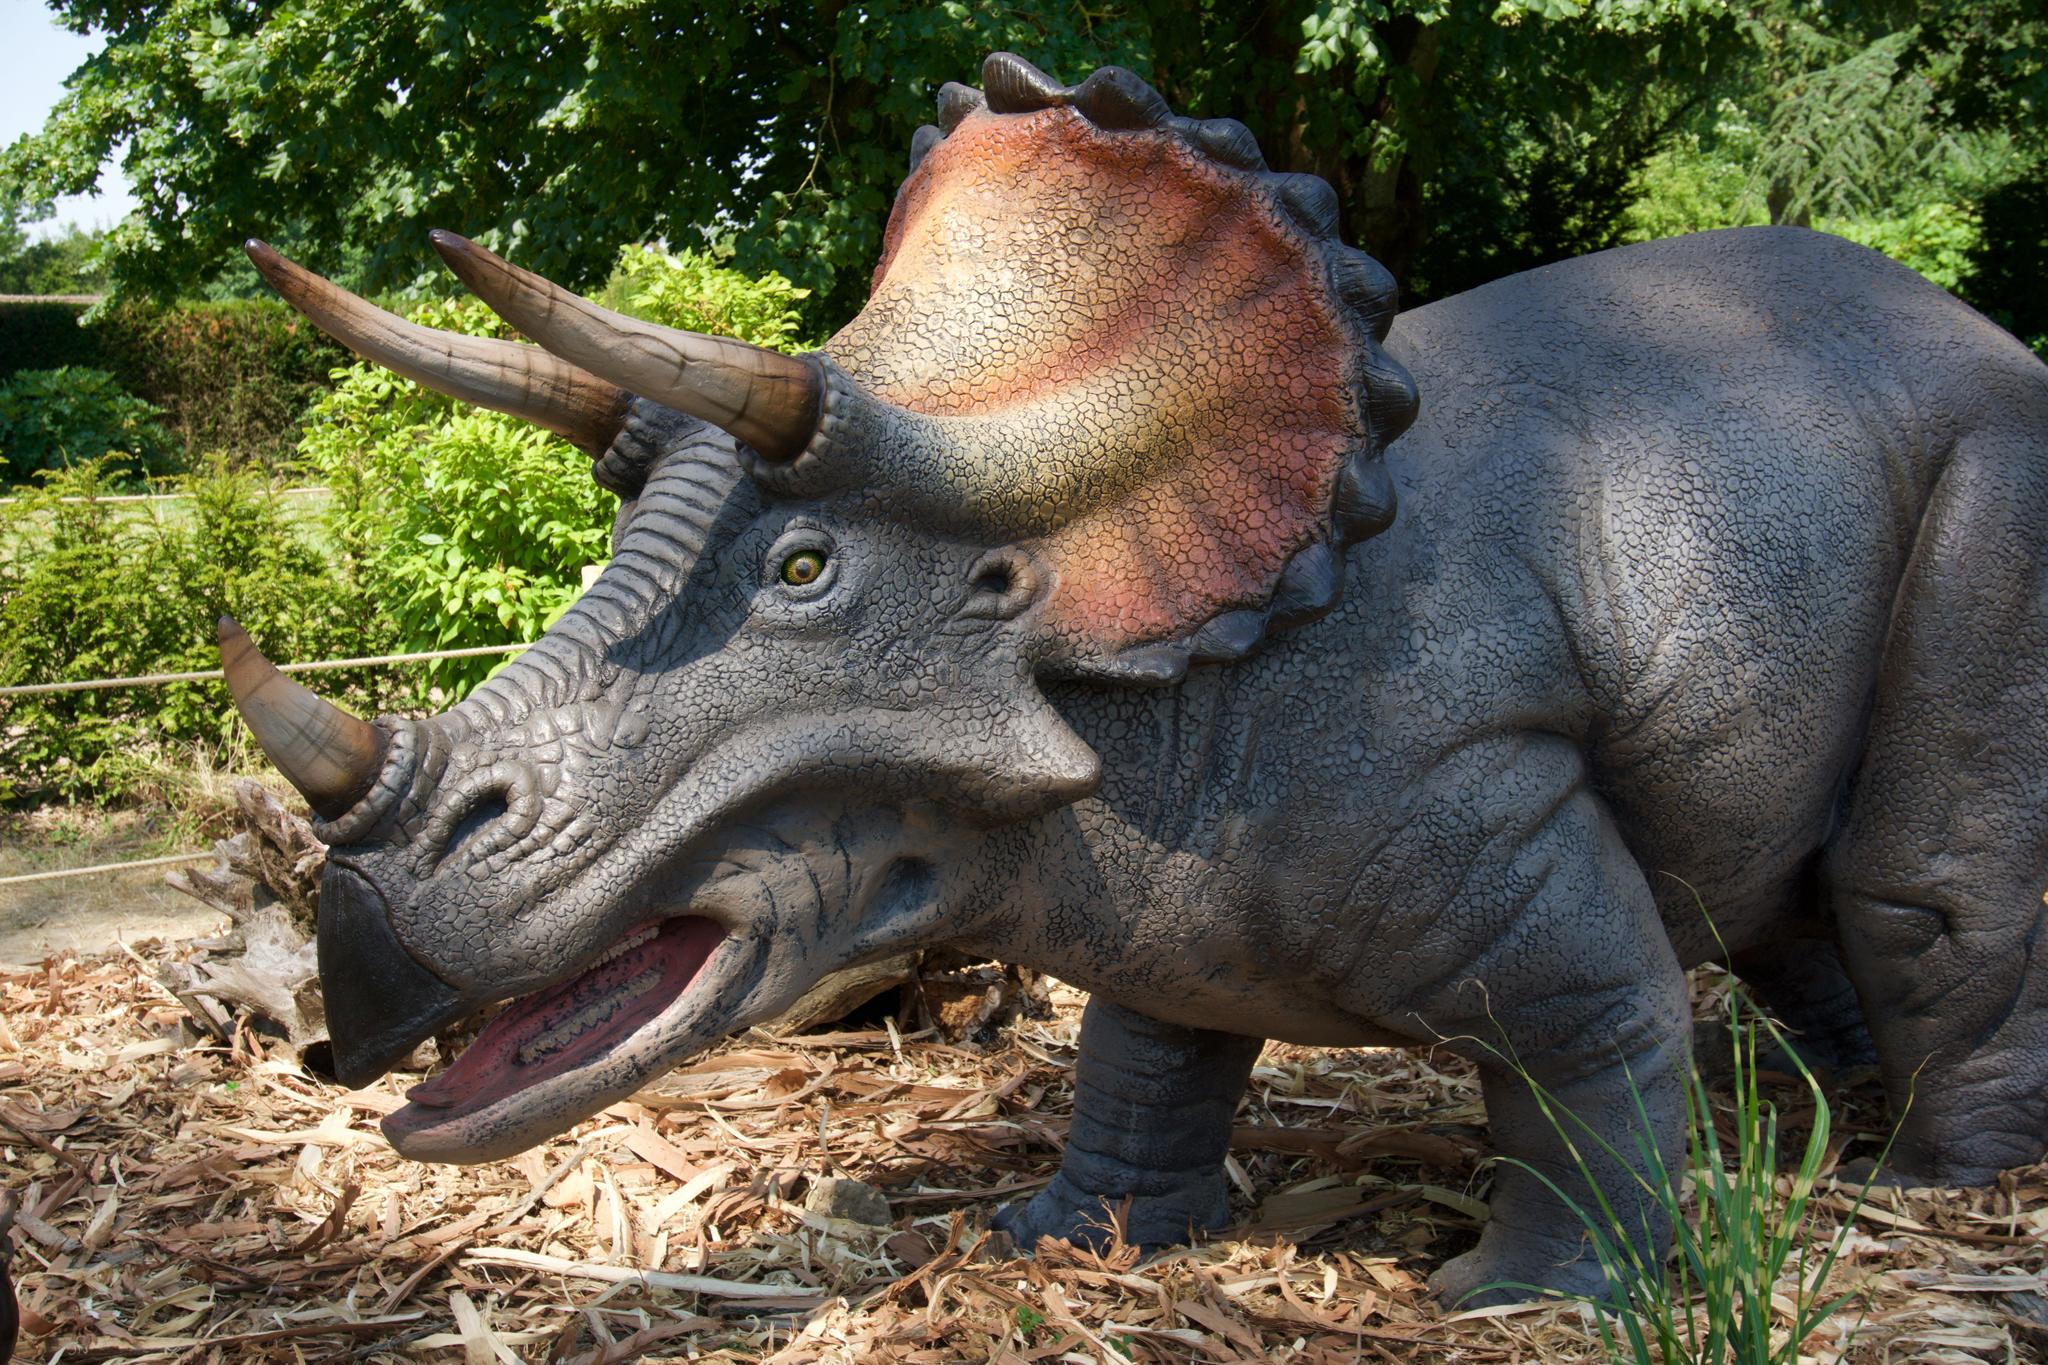 &#13;
Triceratops at Zoorassic Park&#13;